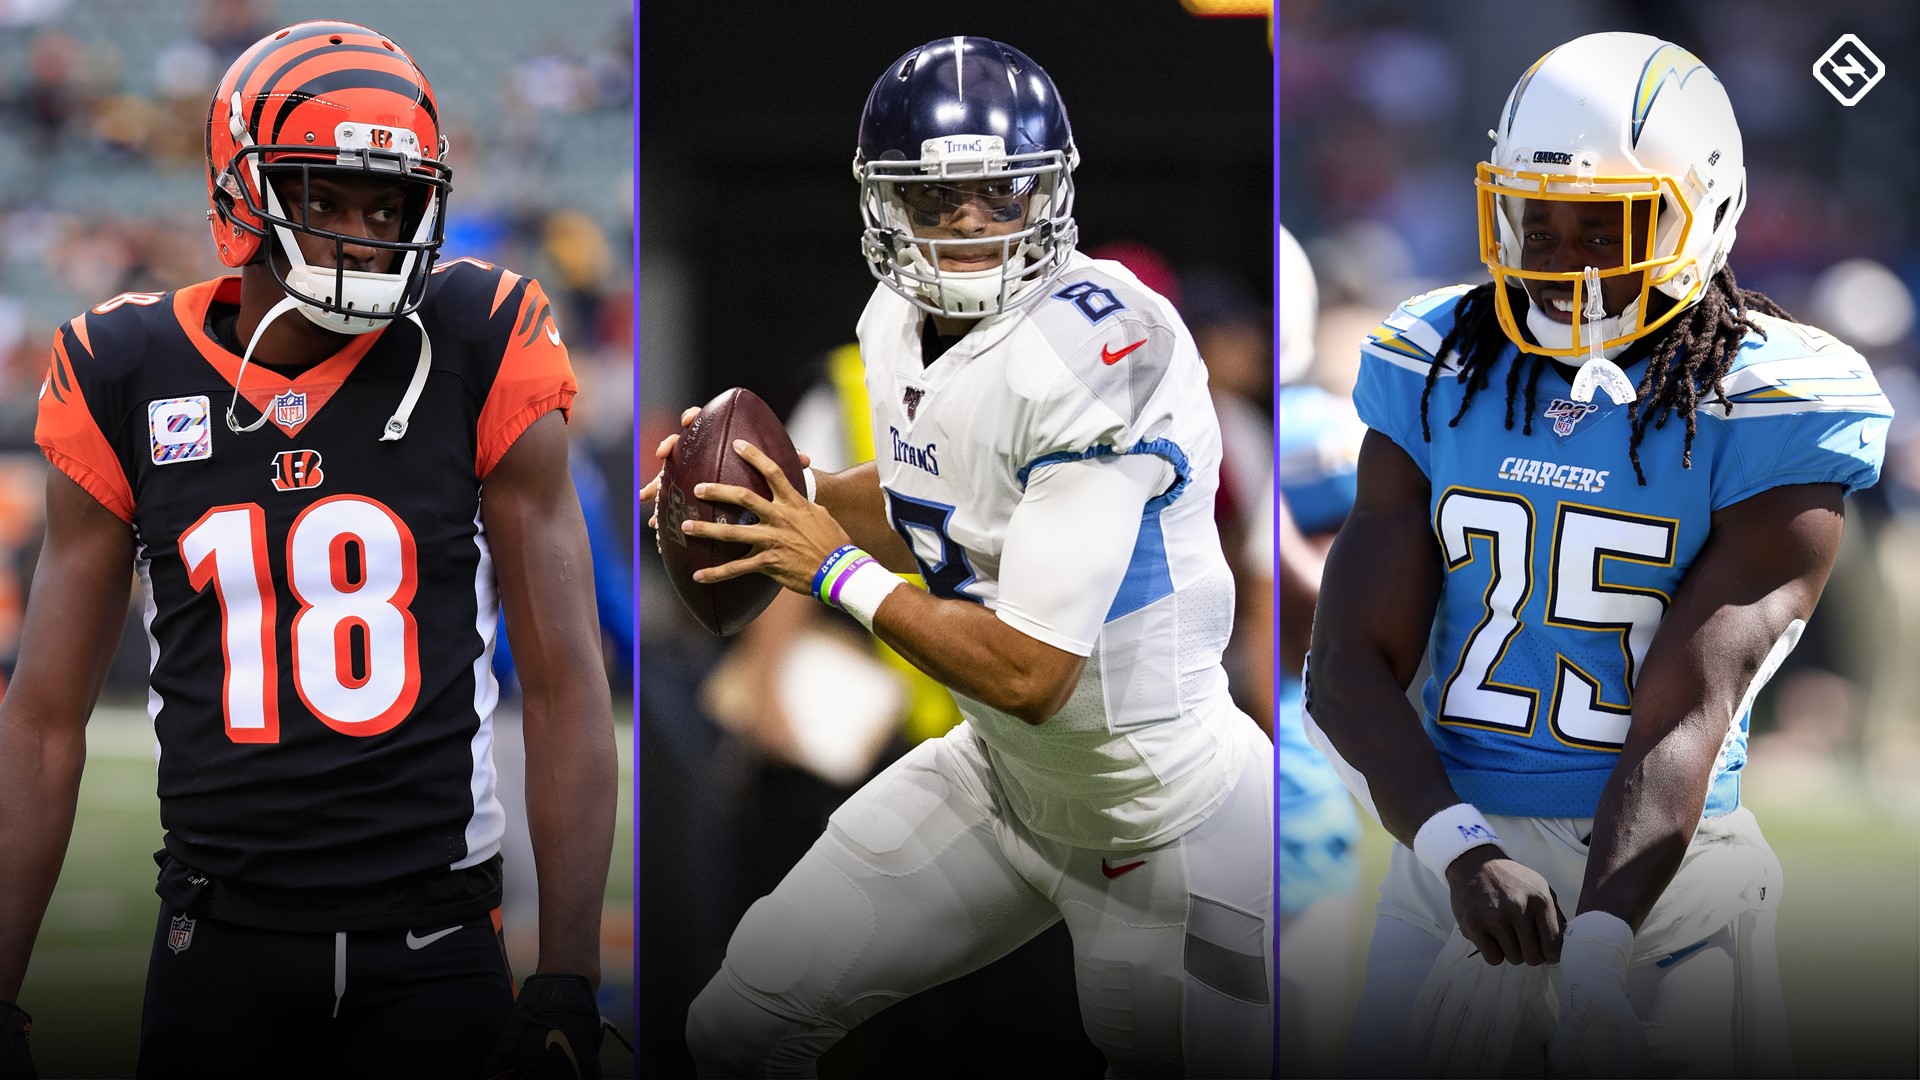 NFL trade rumors 10 players most likely to be traded at the 2019